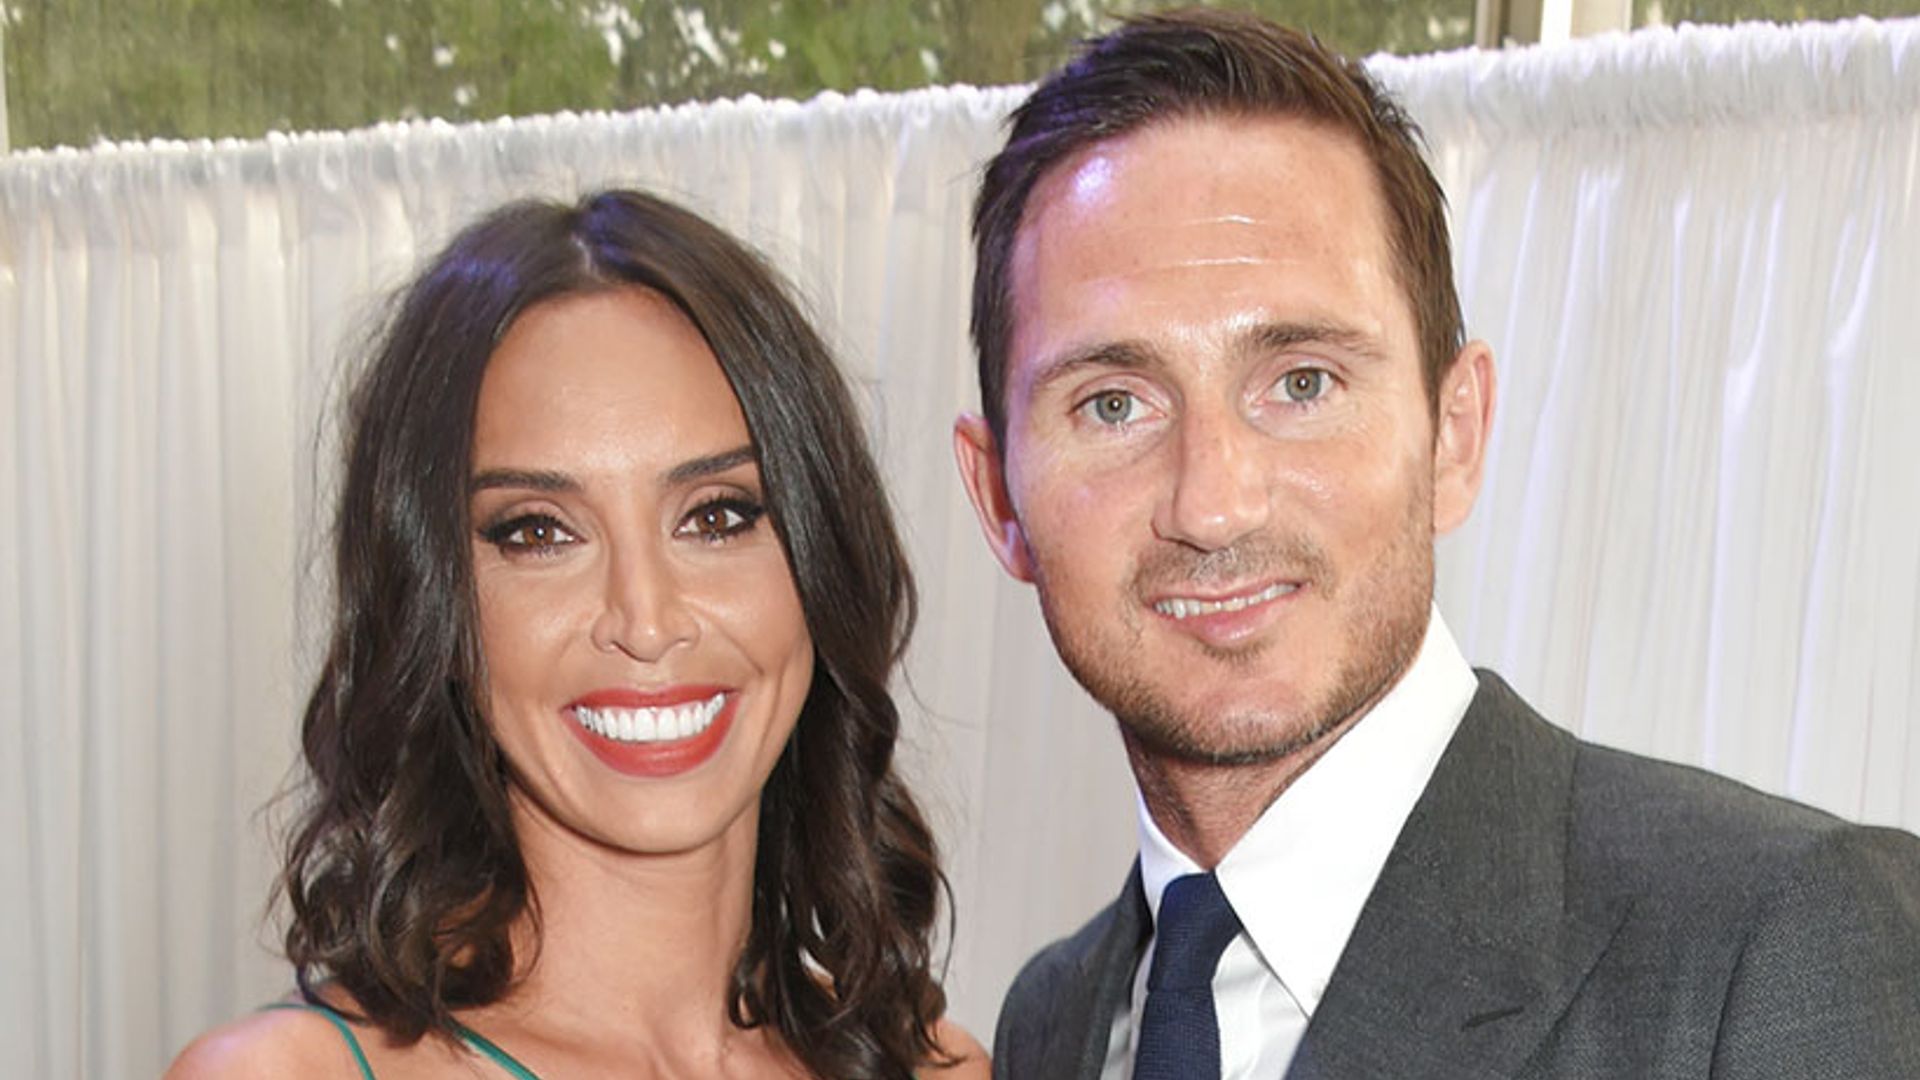 Christine Lampard pays gushing tribute to husband Frank as they celebrate second wedding anniversary